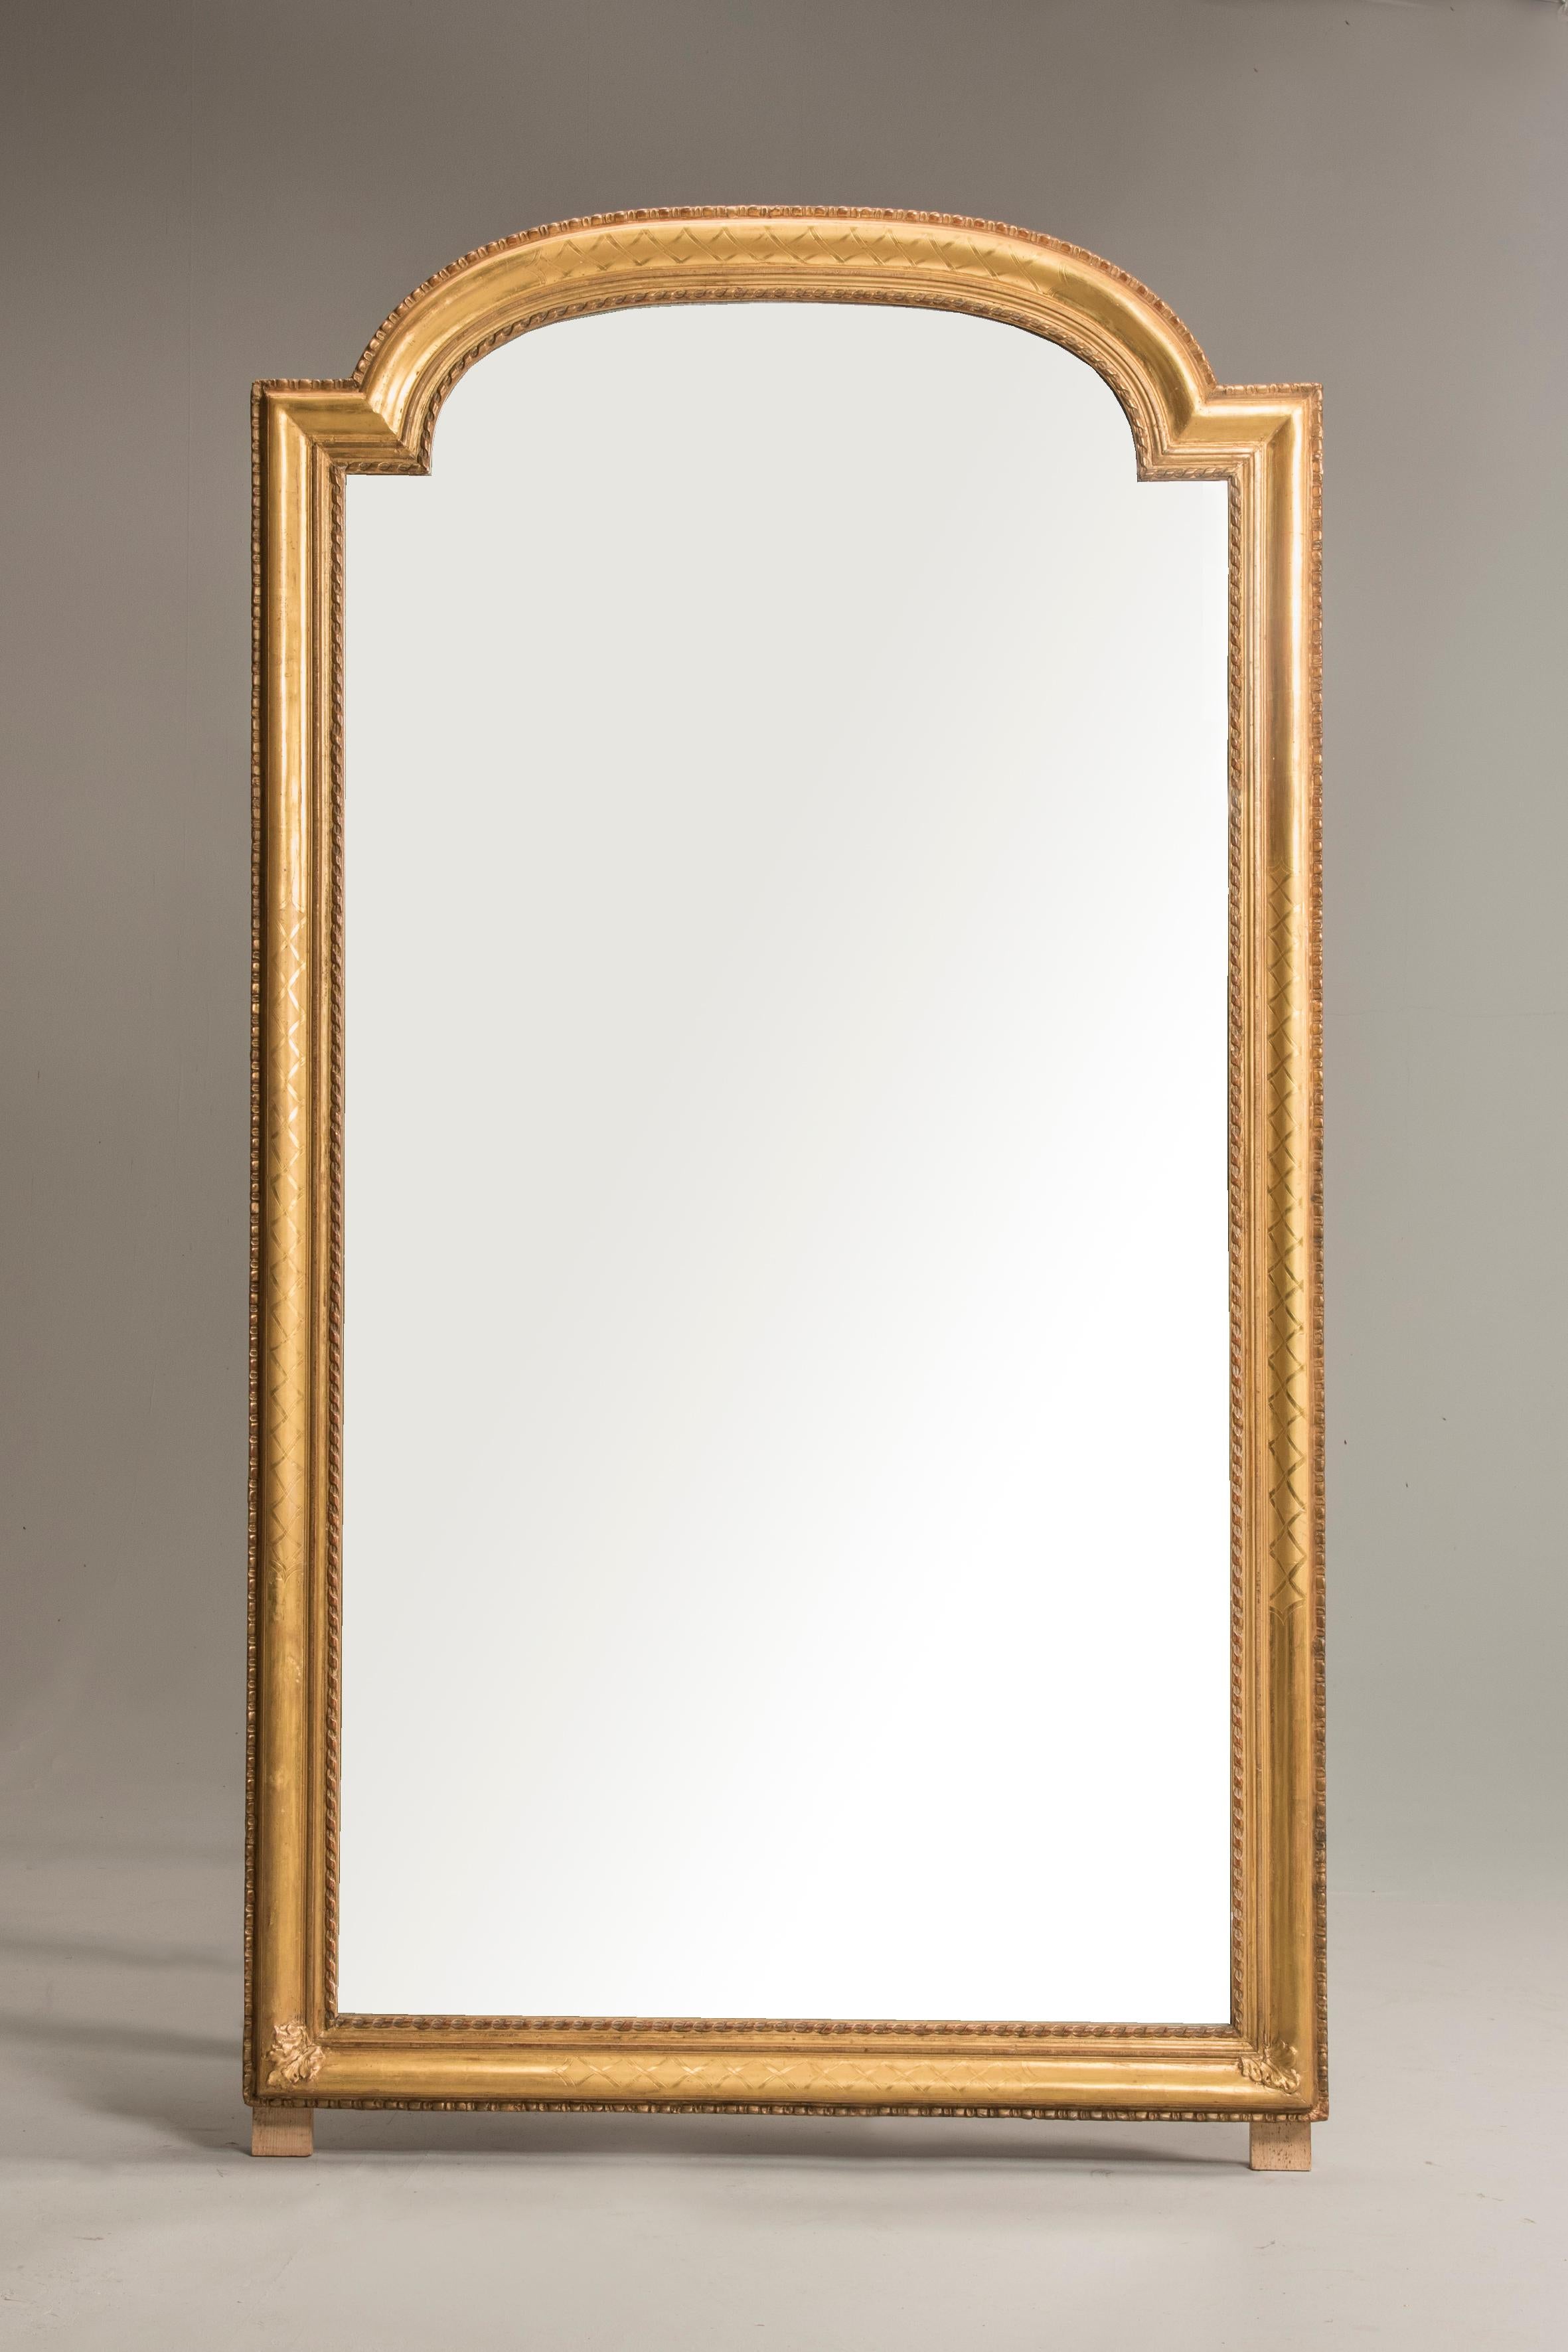 Mid-19th century Louis Philippe mirror, giltwood frame from France from 1840-1860 period. Its original silvered mirror is the most appreciable detail together with the precious gold foil decorating the frame. The wood frame is gentle engraved and